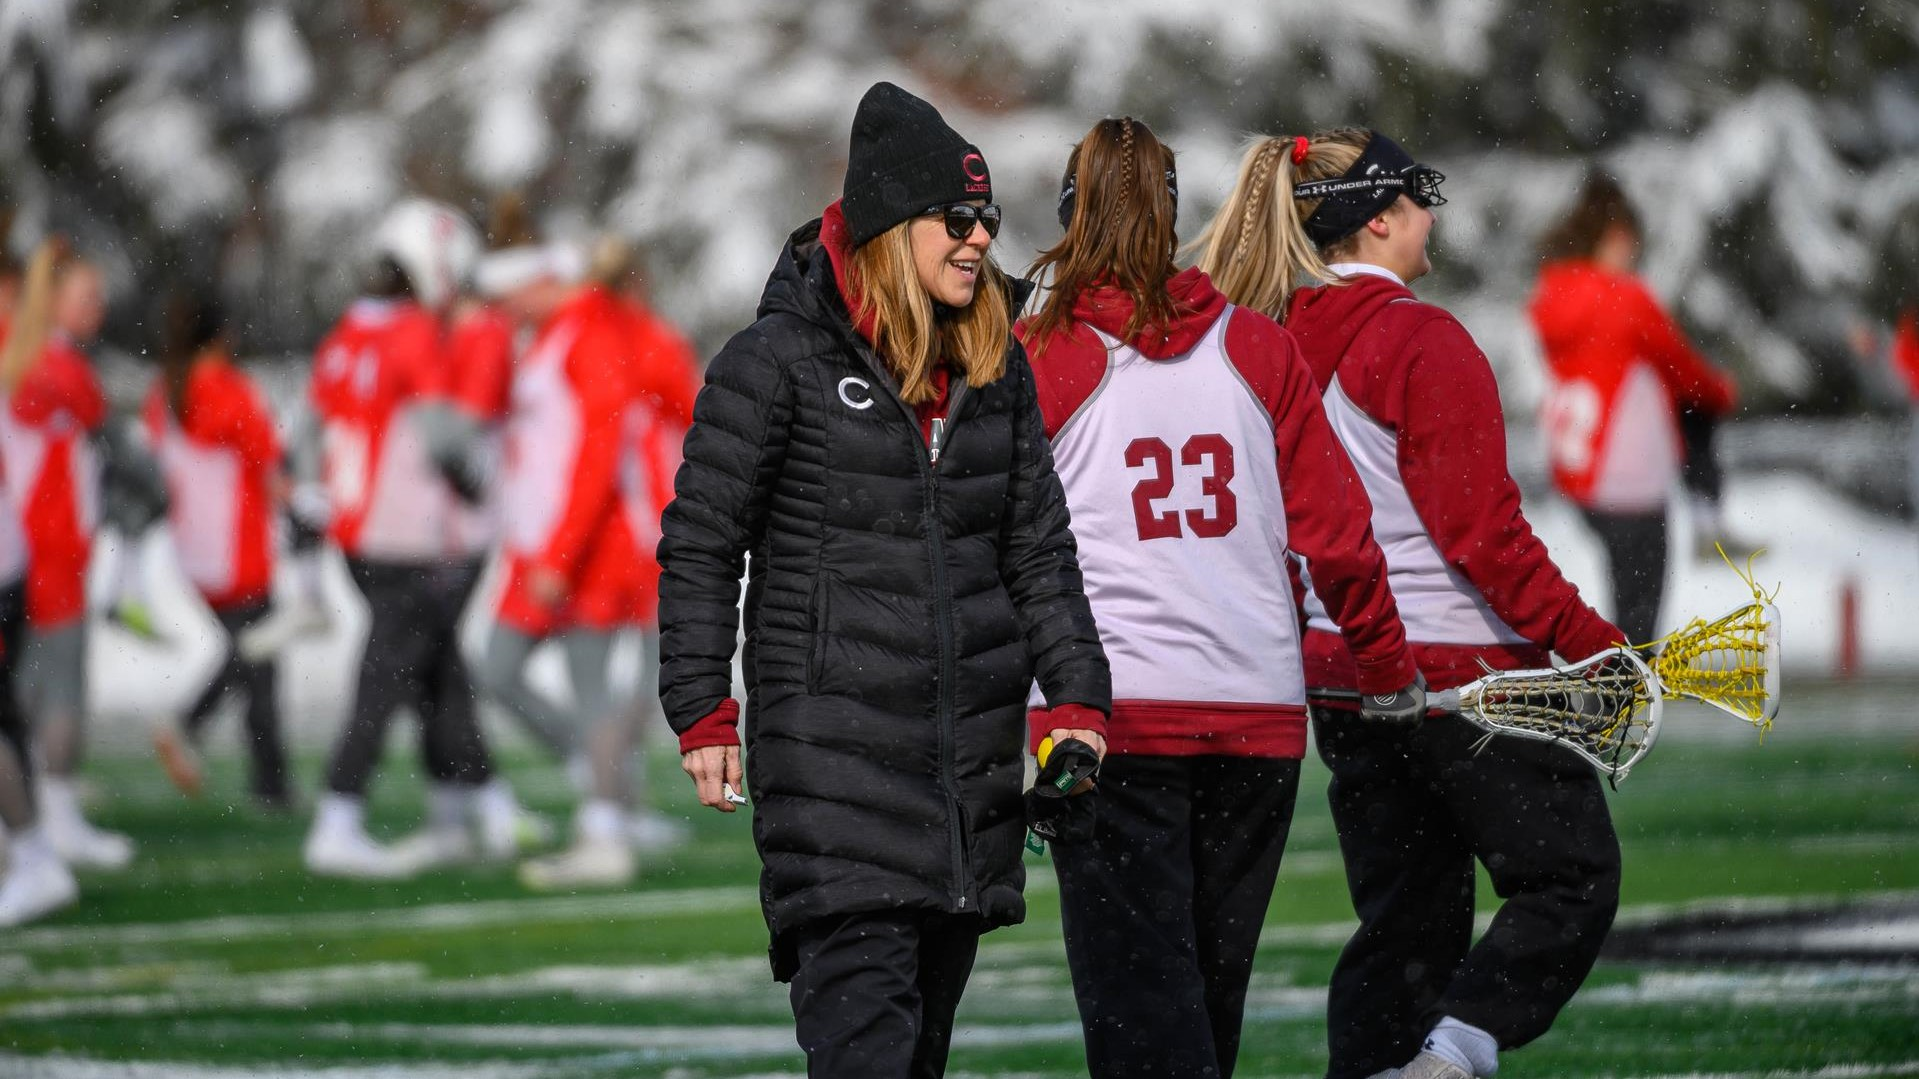 Report Alleges Bullying, Mistreatment by Colgate University Women’s Lacrosse Coach